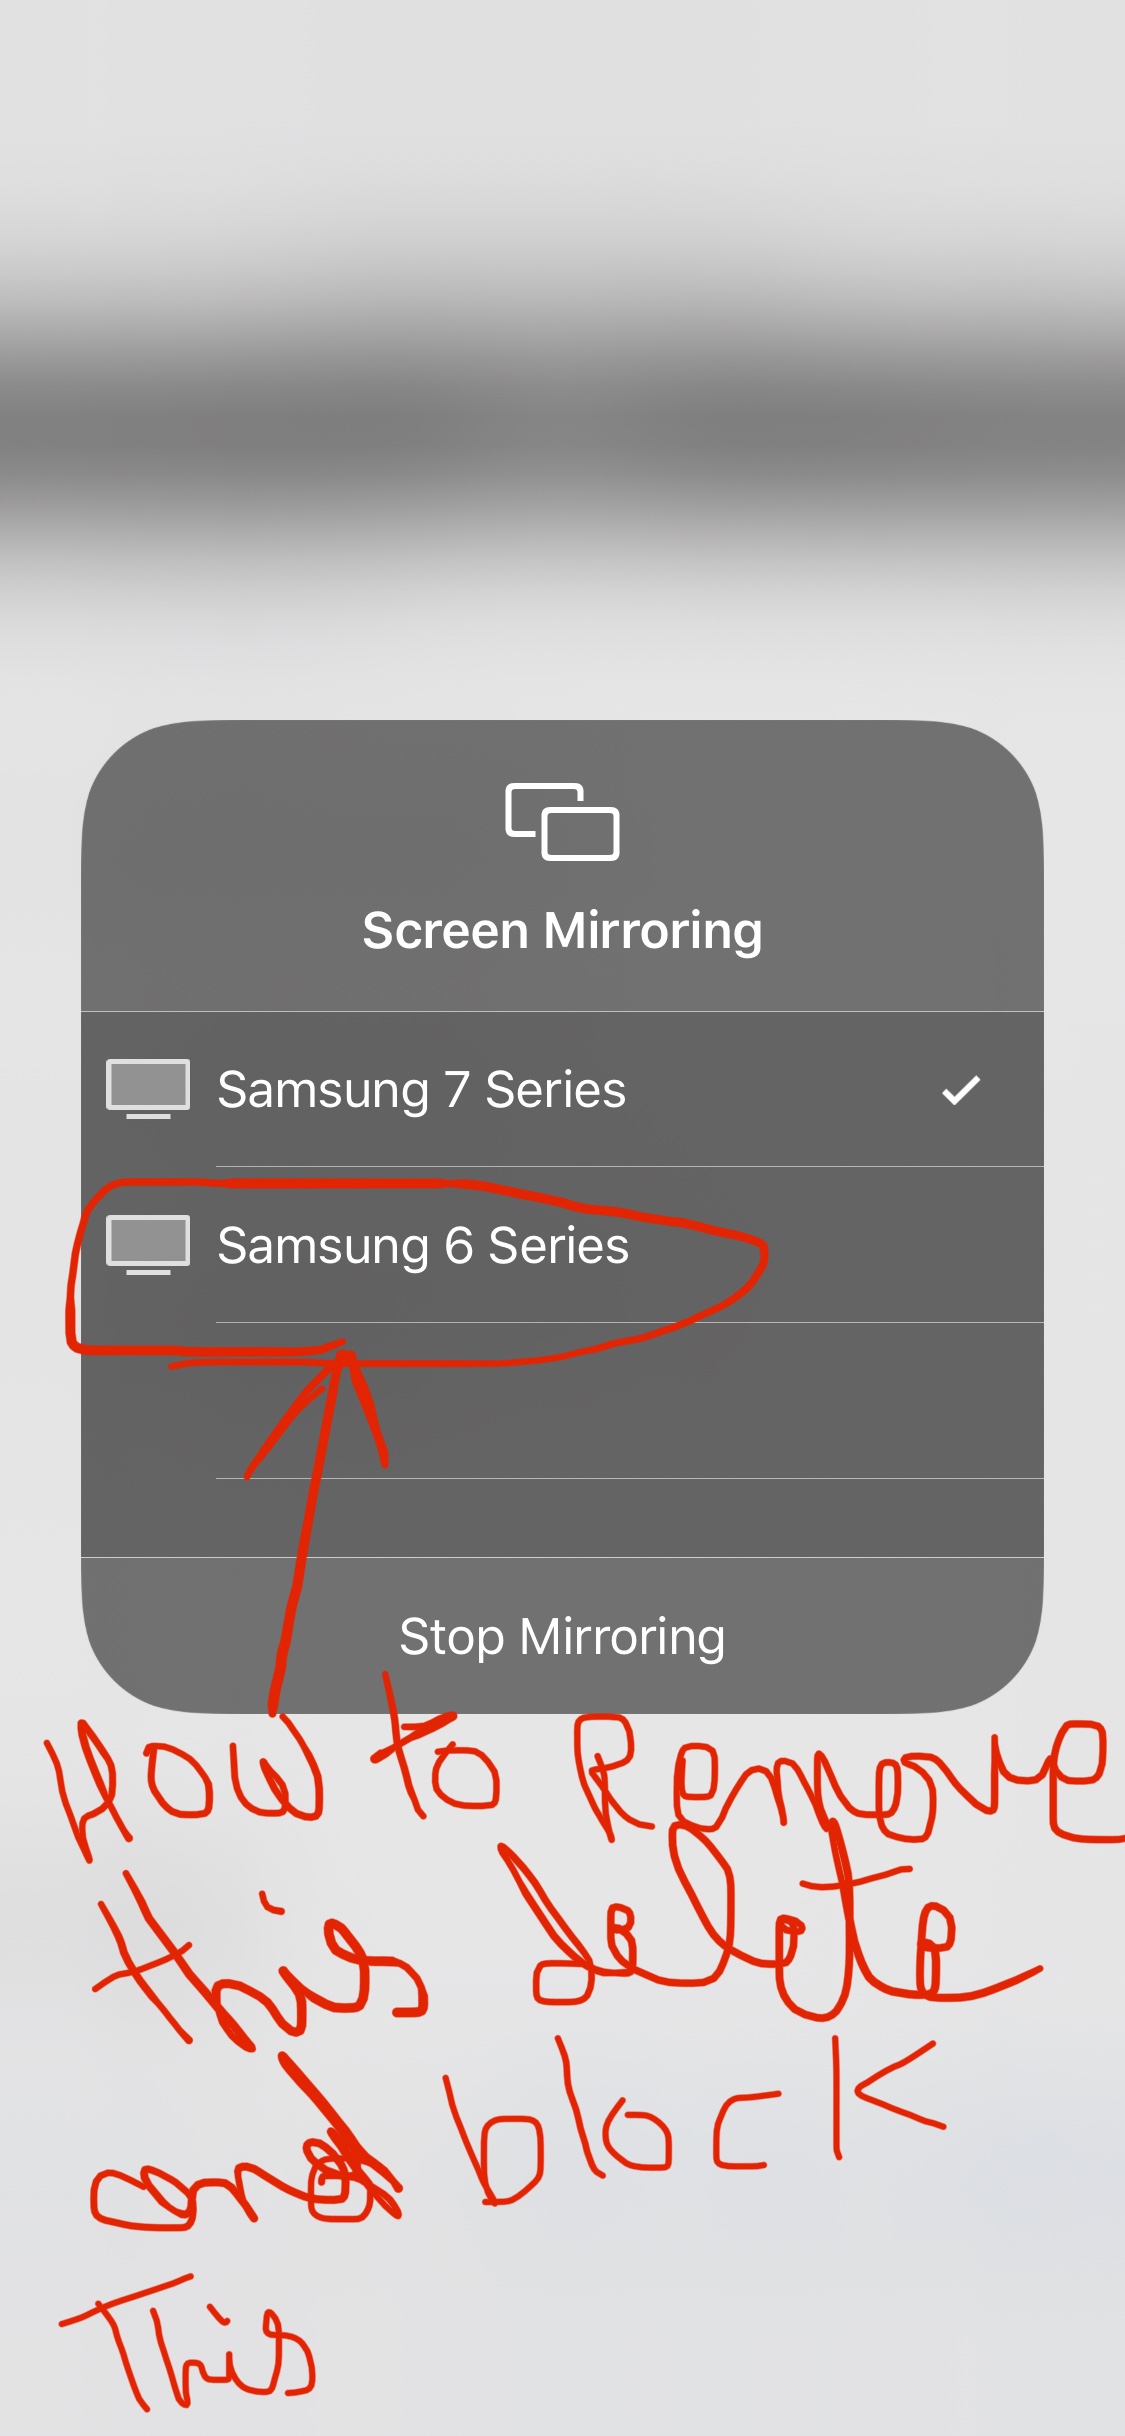 How To Remove Samsung Tv From Iphone, How Do I Get My Iphone To Screen Mirror Samsung Tv